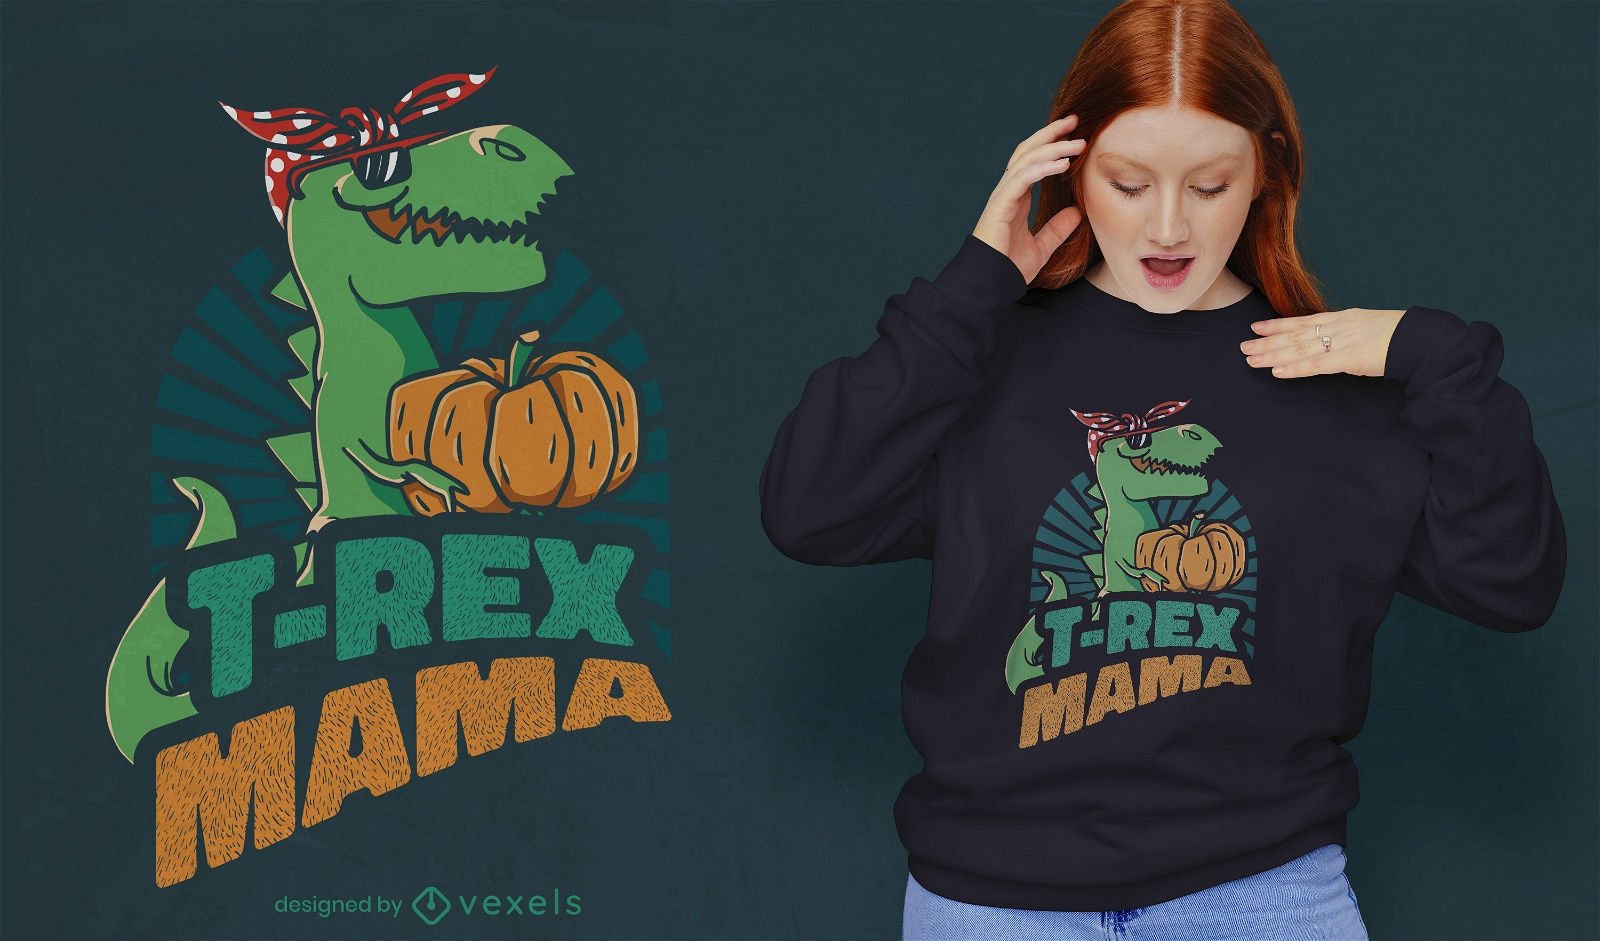 Awesome t-rex mama t-shirt design